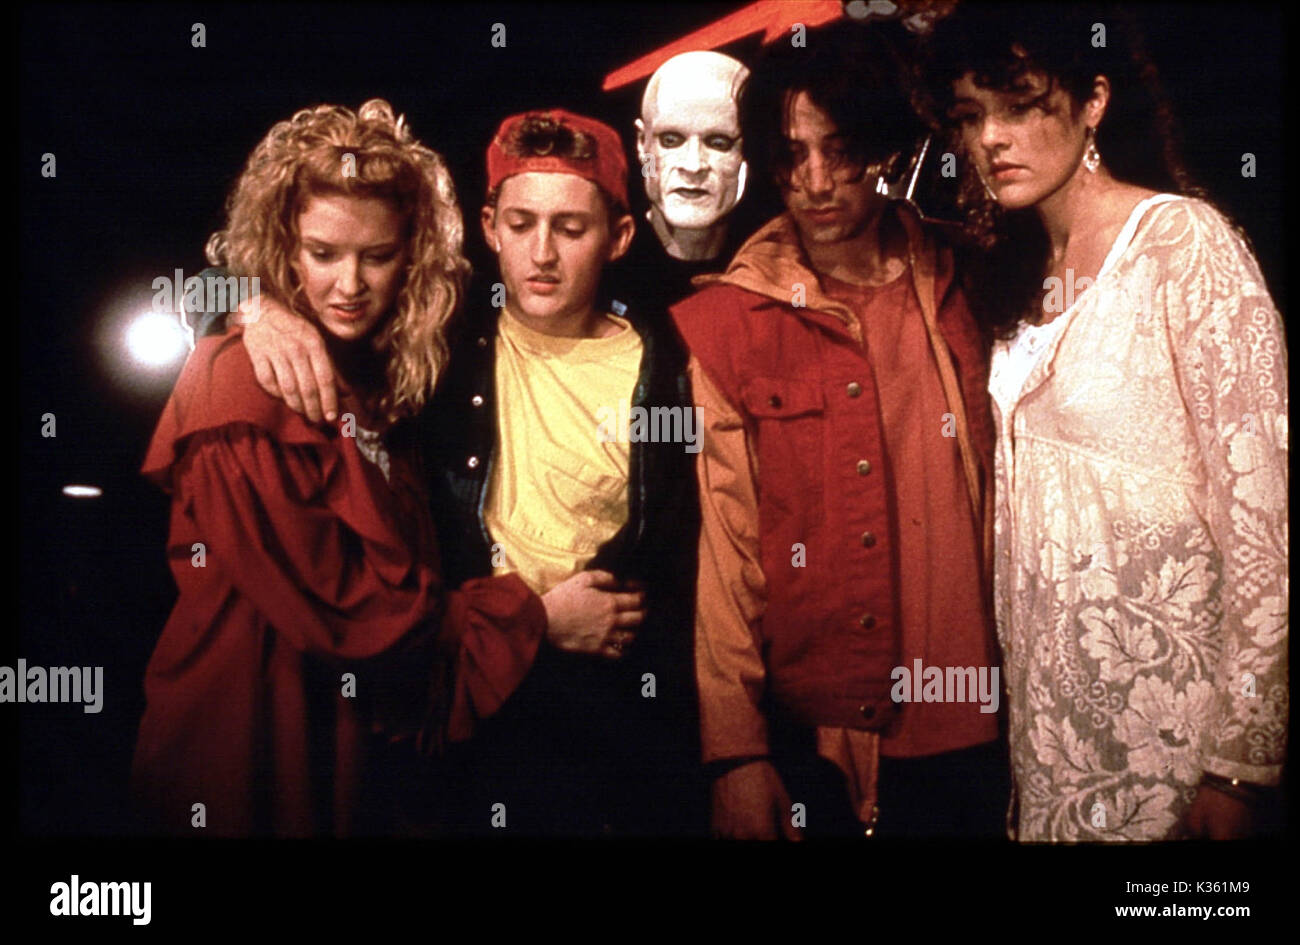 BILL AND TED'S BOGUS JOURNEY   [US 1991]  centre ALEX WINTER, WILLIAM SADLER as The Grim Reaper, KEANU REEVES     Date: 1991 Stock Photo